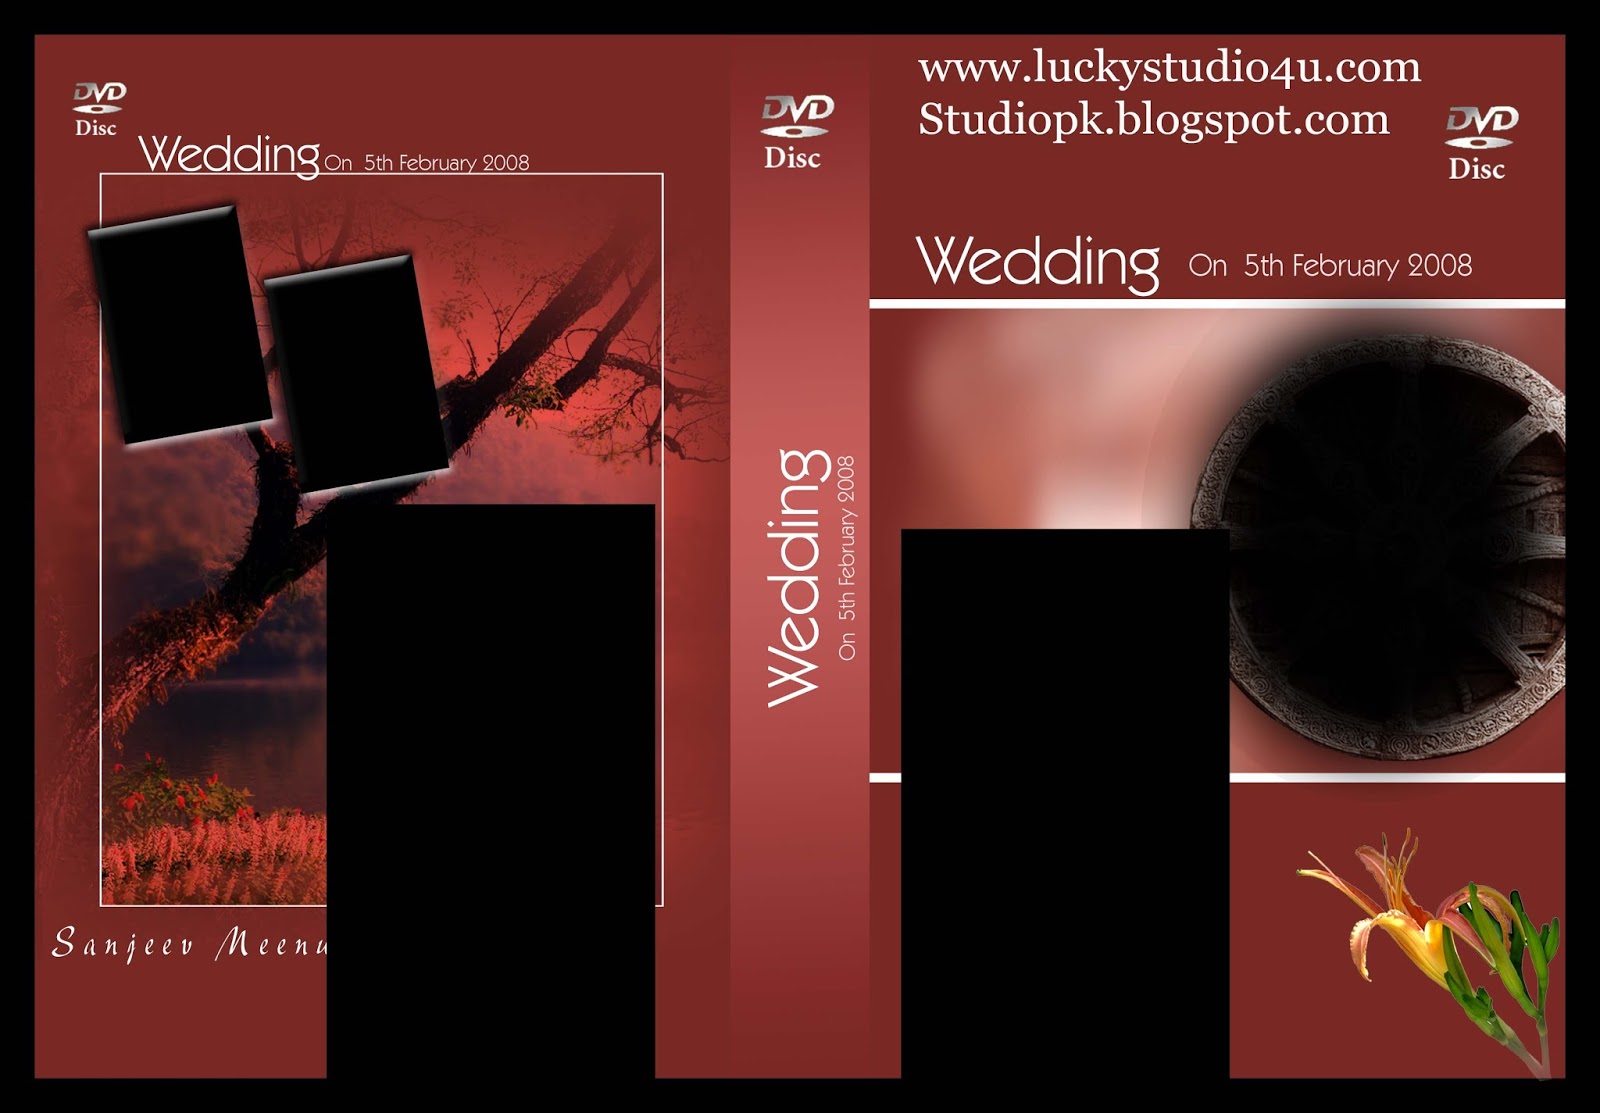 27 Wedding Dvd Cover Psd Templates Free Download Wedding Dvd Cover Wedding Dvd Wedding Album Design